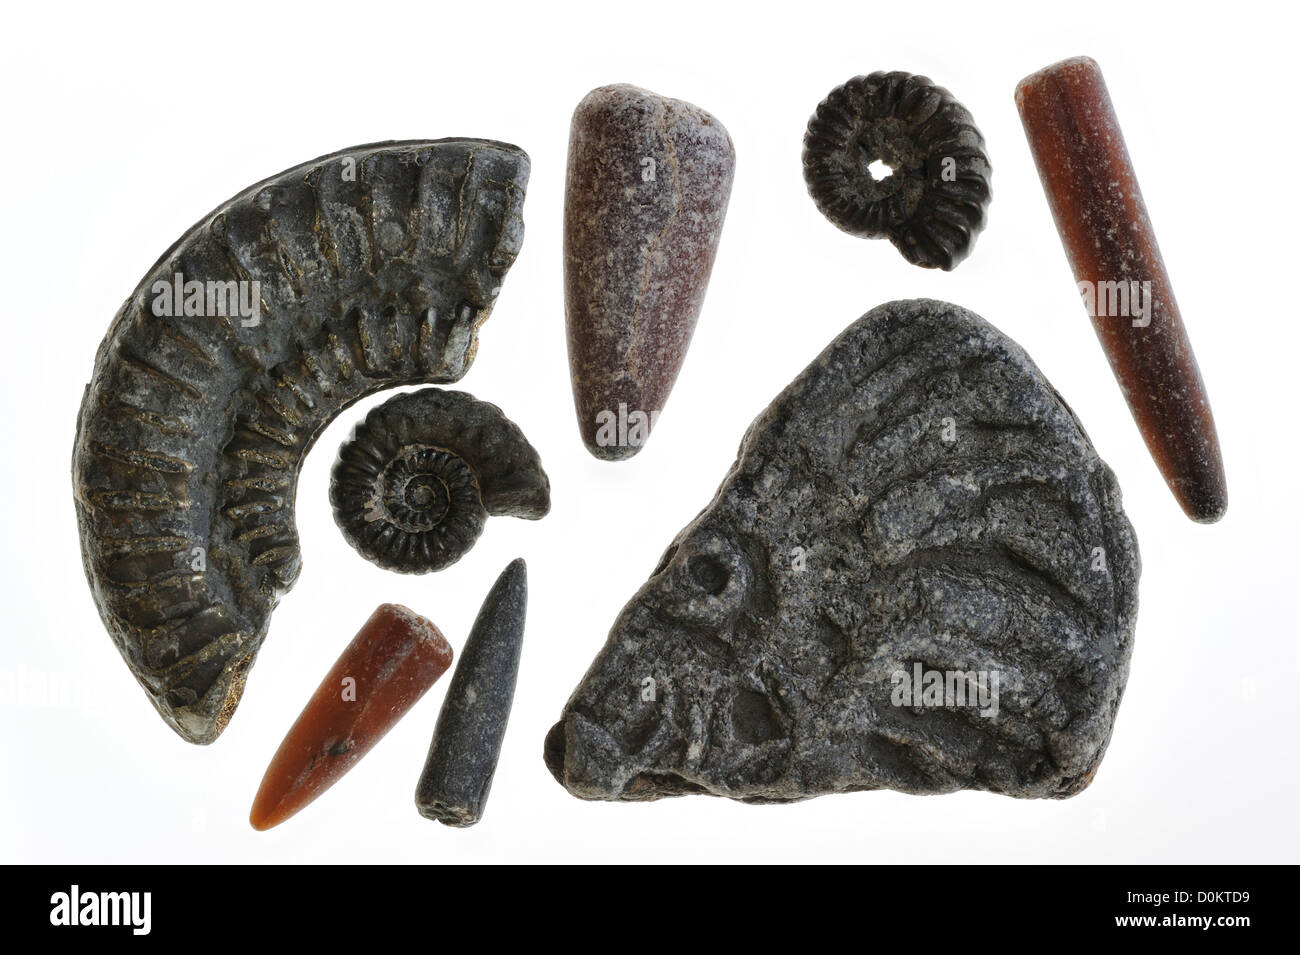 Collection of fossils like fossil guards of belemnites and ammonites from Lyme Regis, Jurassic Coast, Dorset, south England, UK Stock Photo